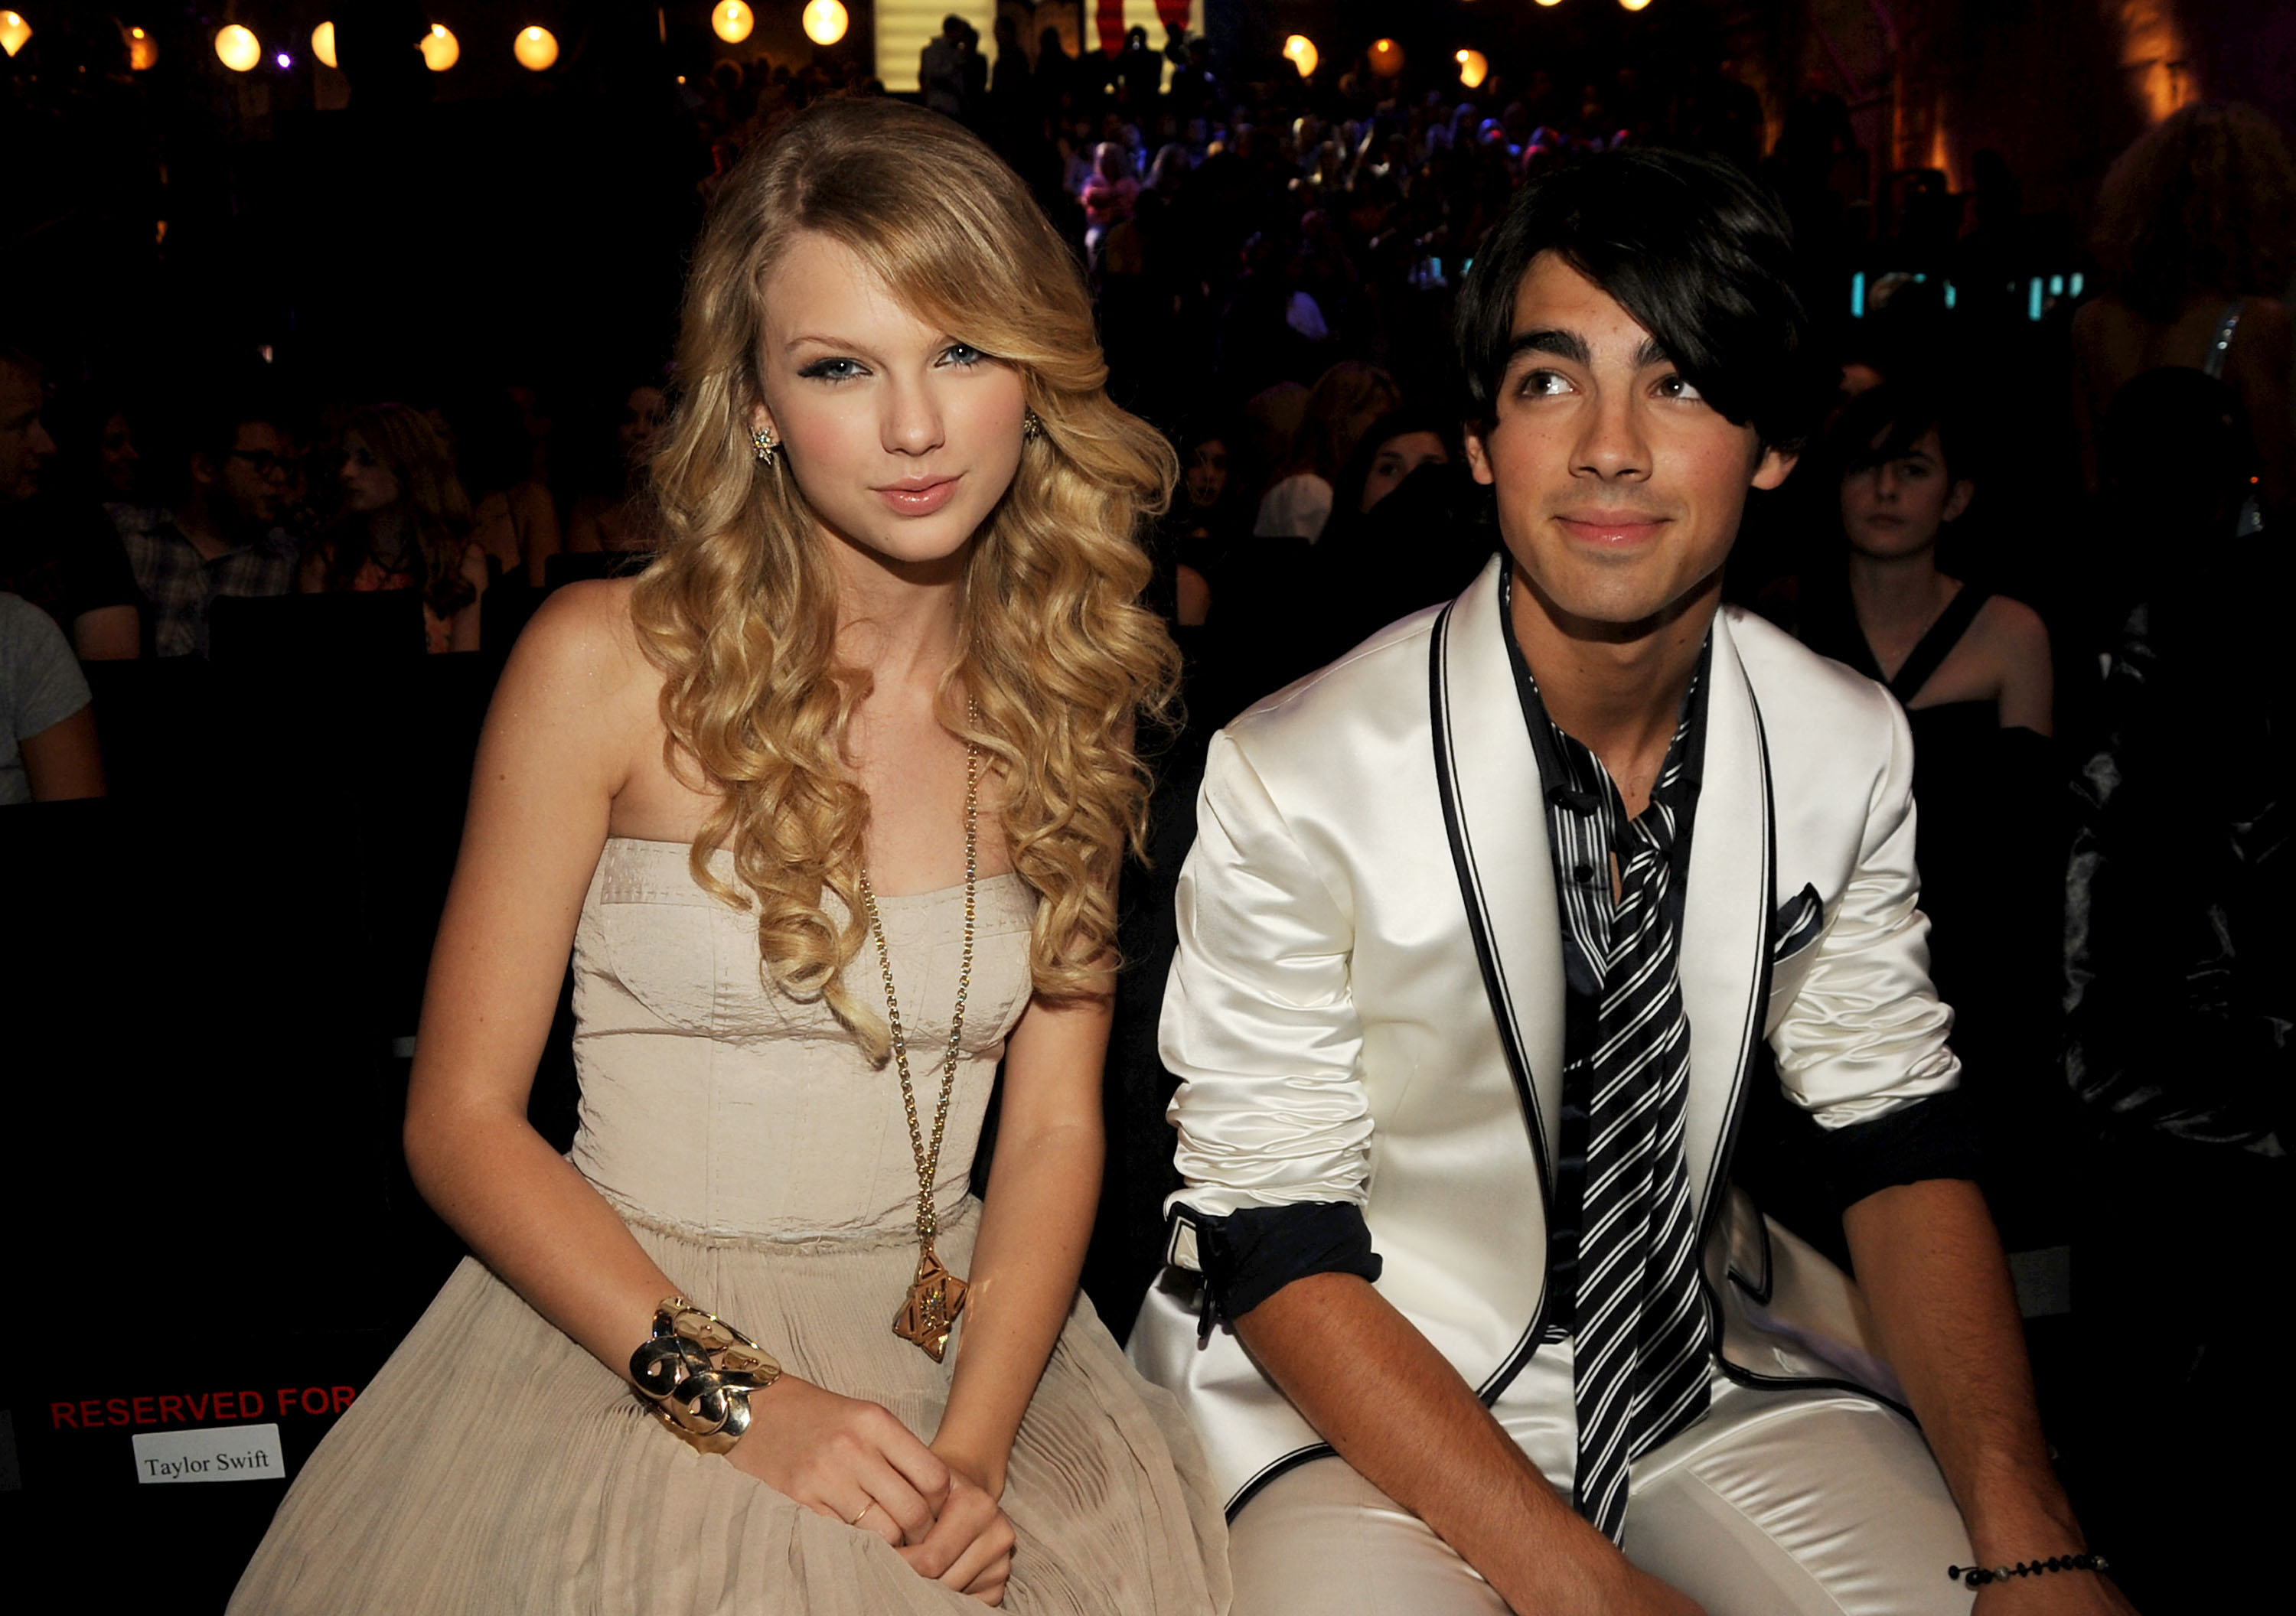 Taylor Swift and Joe Jonas sitting next to each other at an event